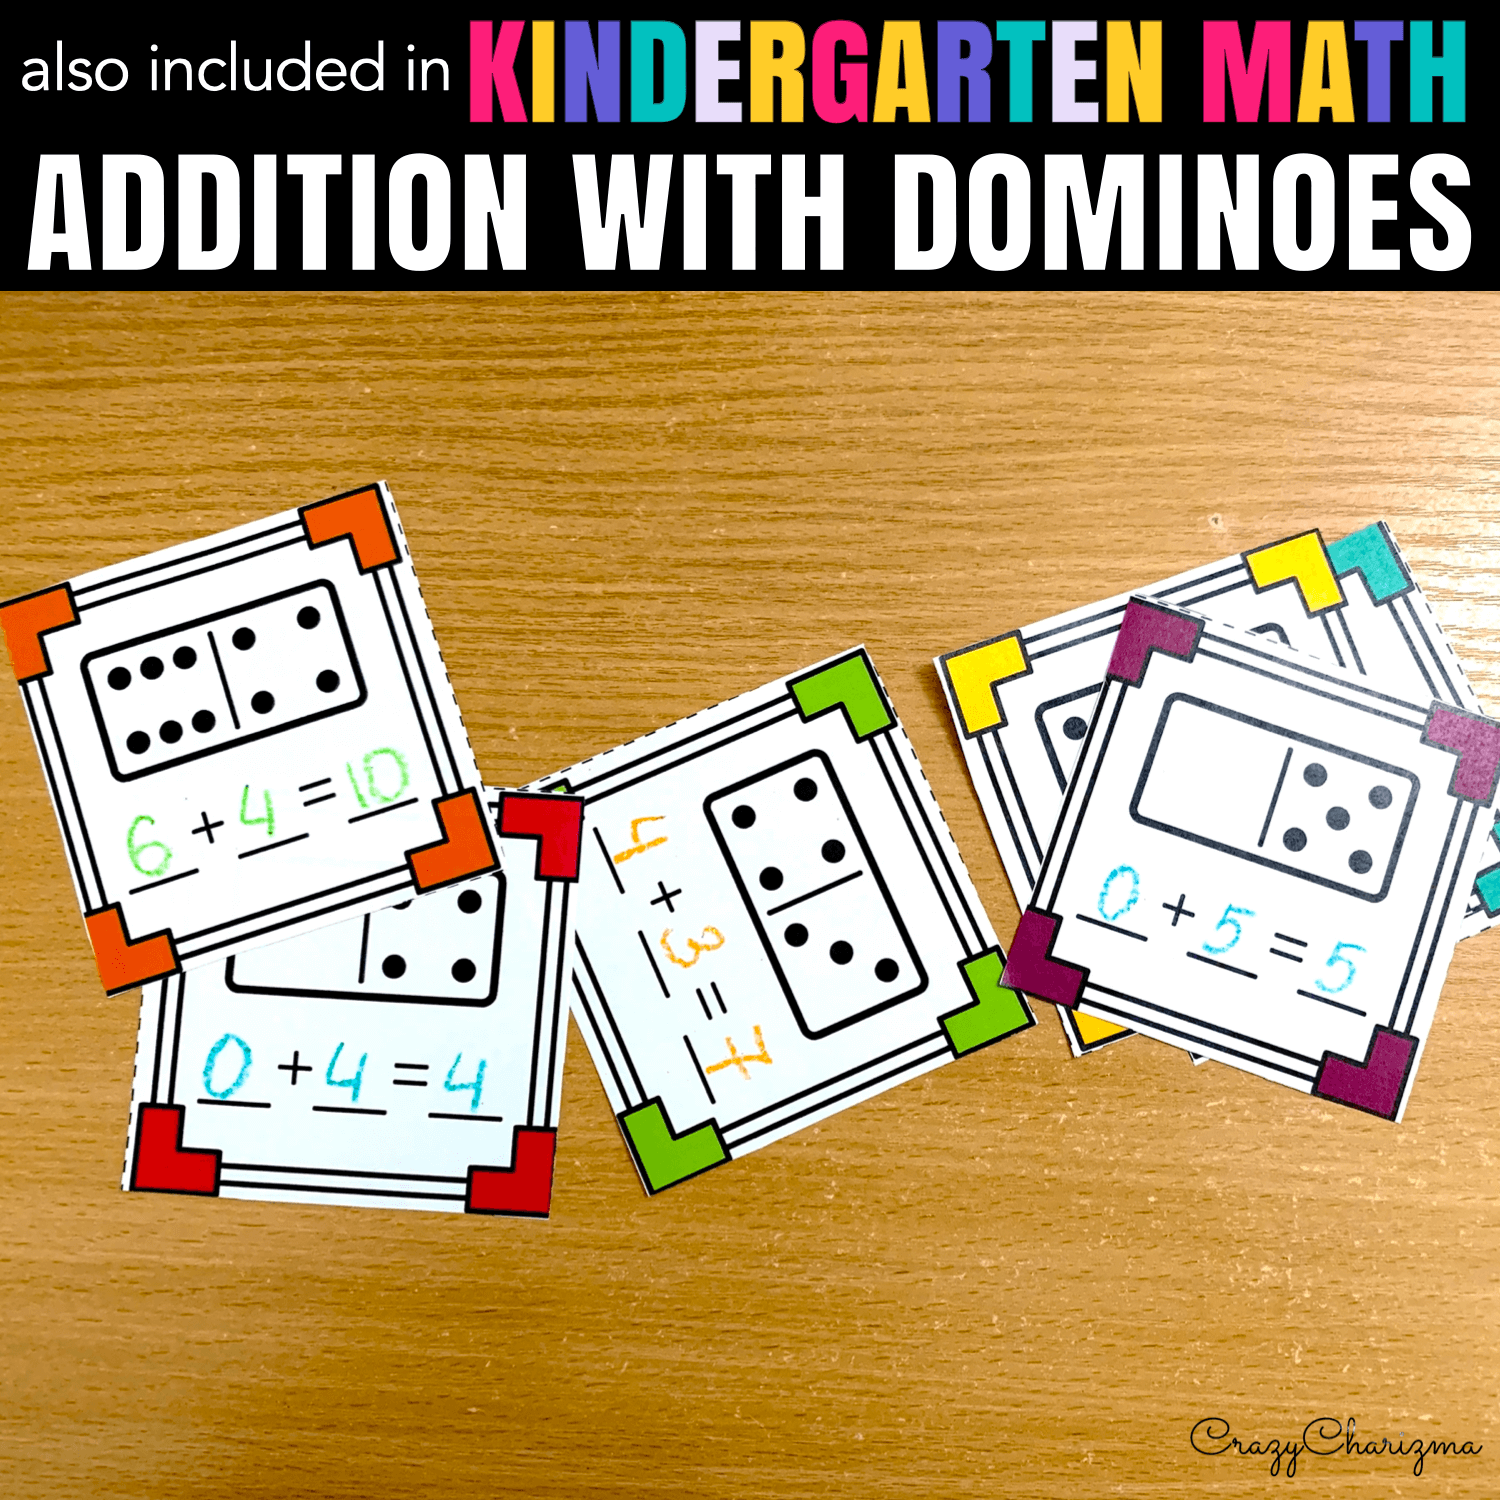 Practice addition to 10 with dominoes using these task cards and no prep worksheets. Find inside 35 pages of practice!